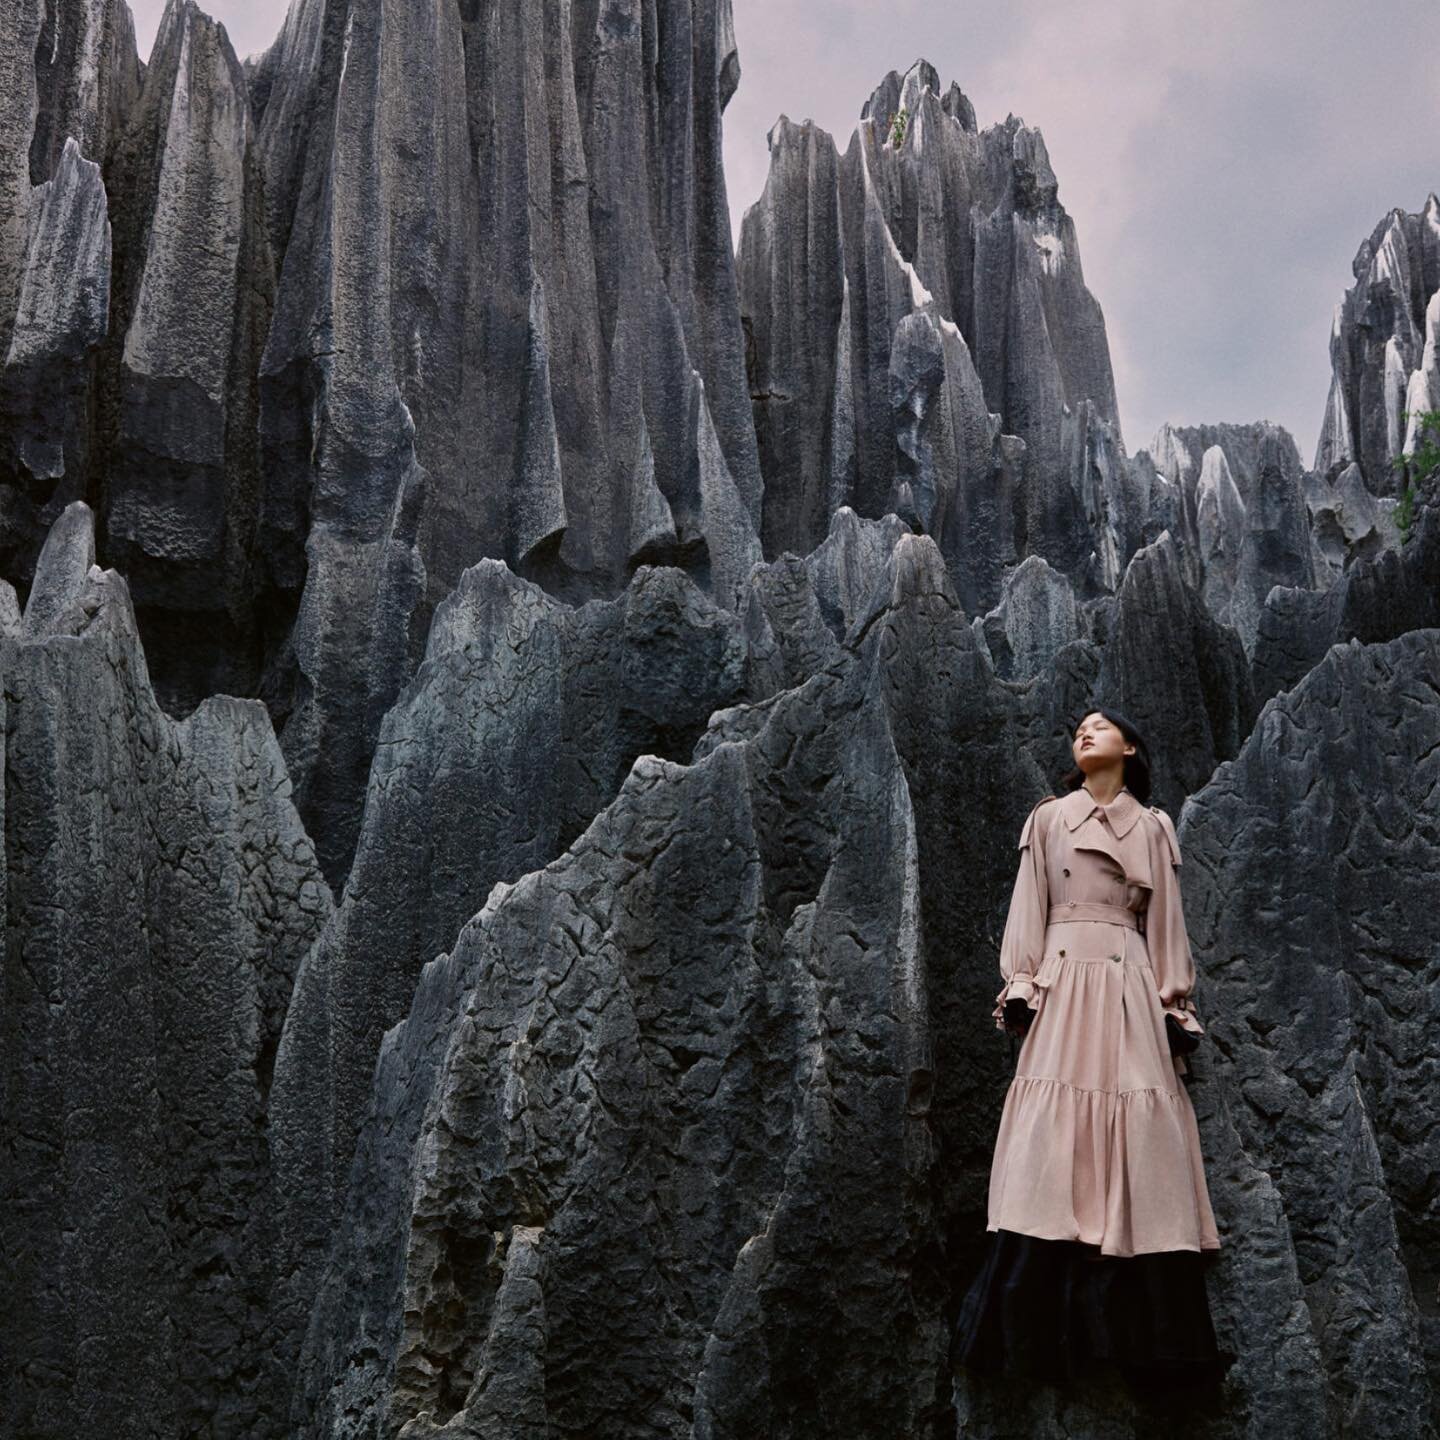 Find peace in the ancient Stone Forest of southwestern China
Photo credit: Jumbo Tsui, Kinfolk 
.
.
.
#ophalos #asia #china #stone #grey #black #forest #photography #pink #asianart